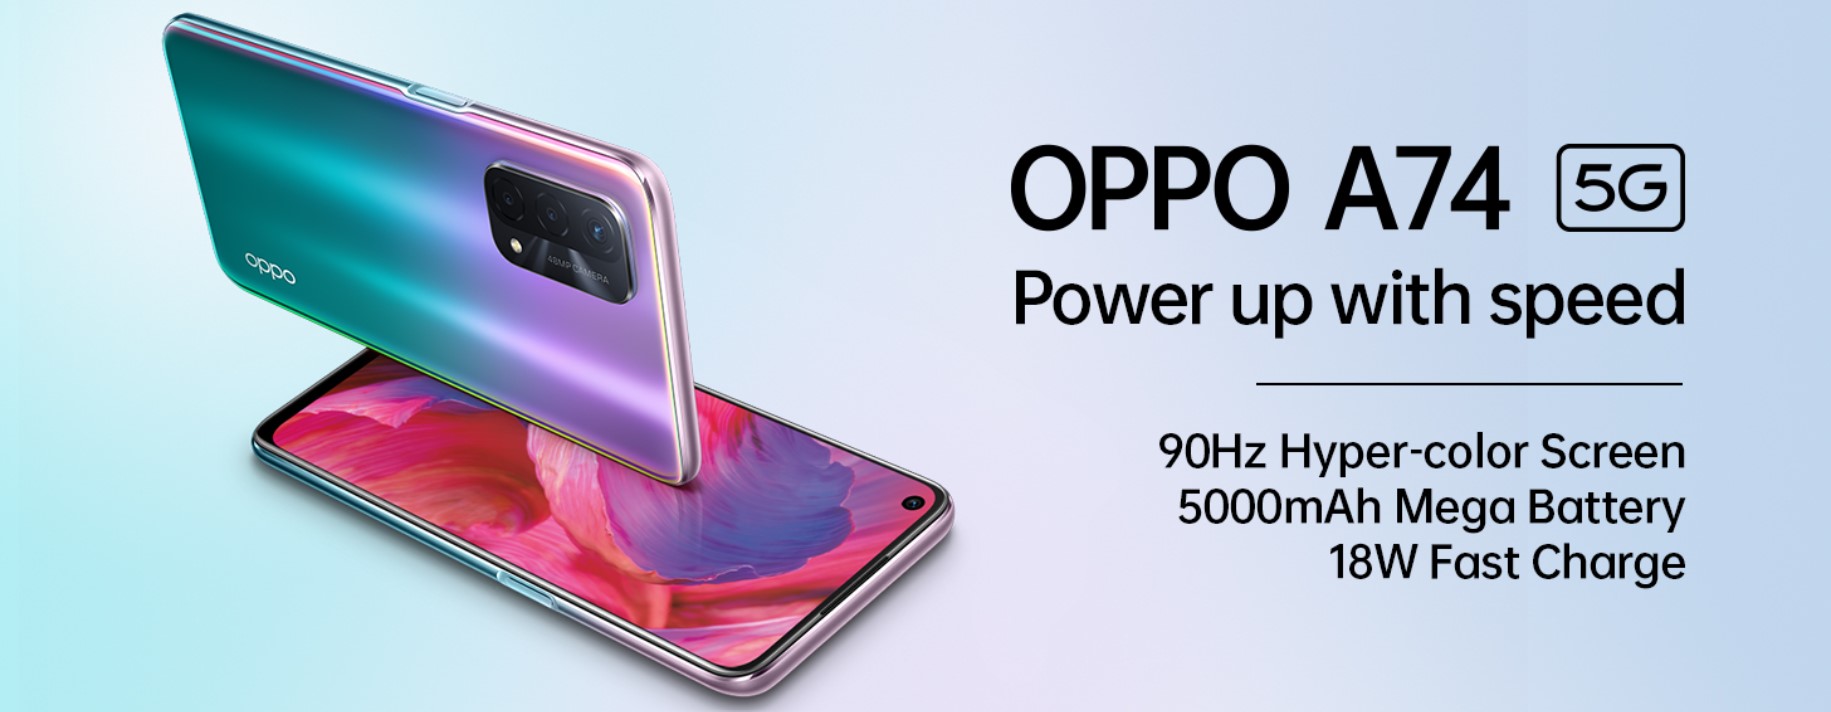 Oppo A74 5G - the best 5g smartphone in India under 20000